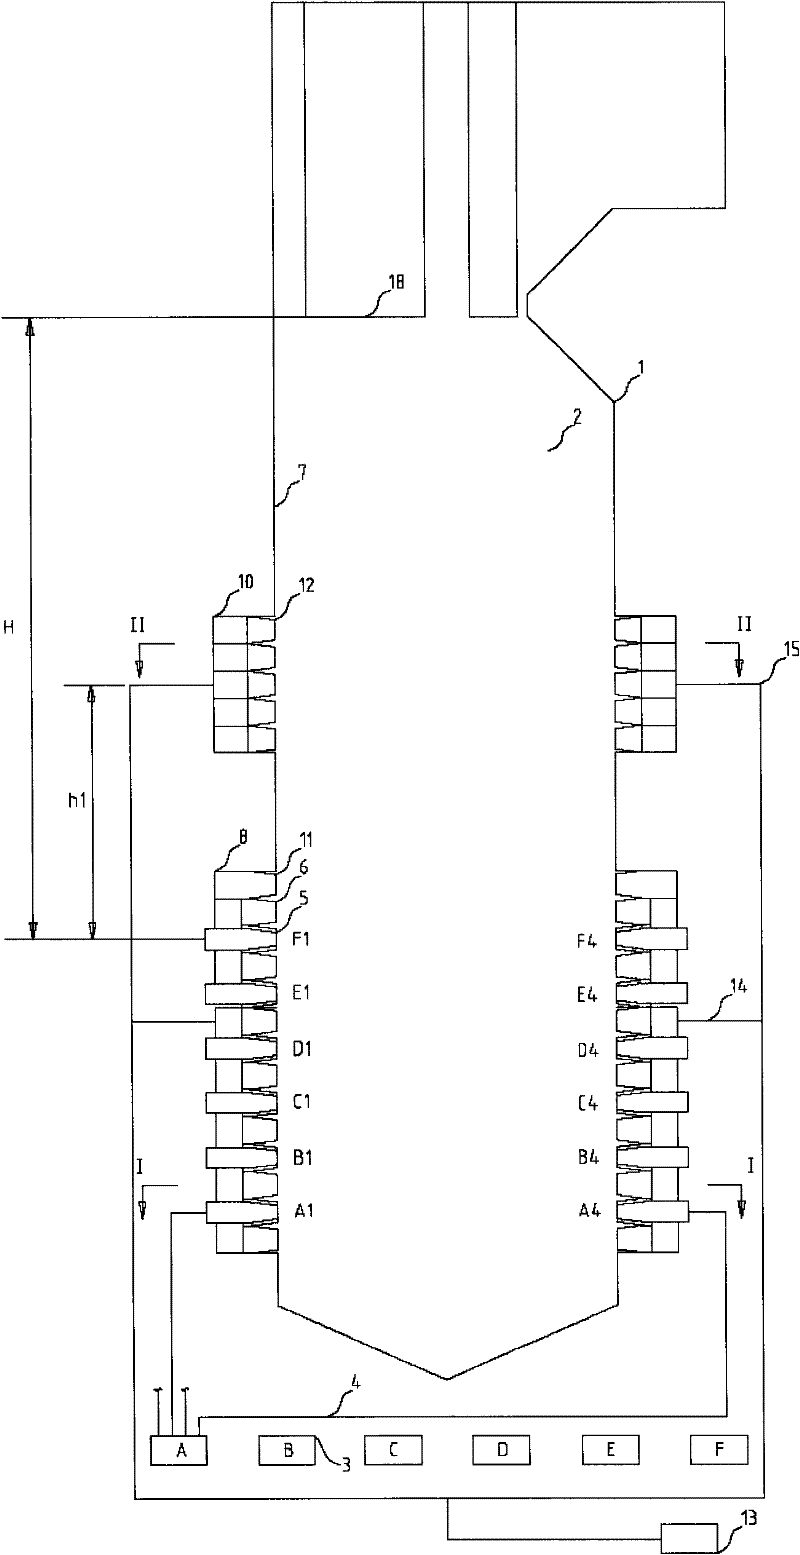 A multi-stage burn-off air layout method